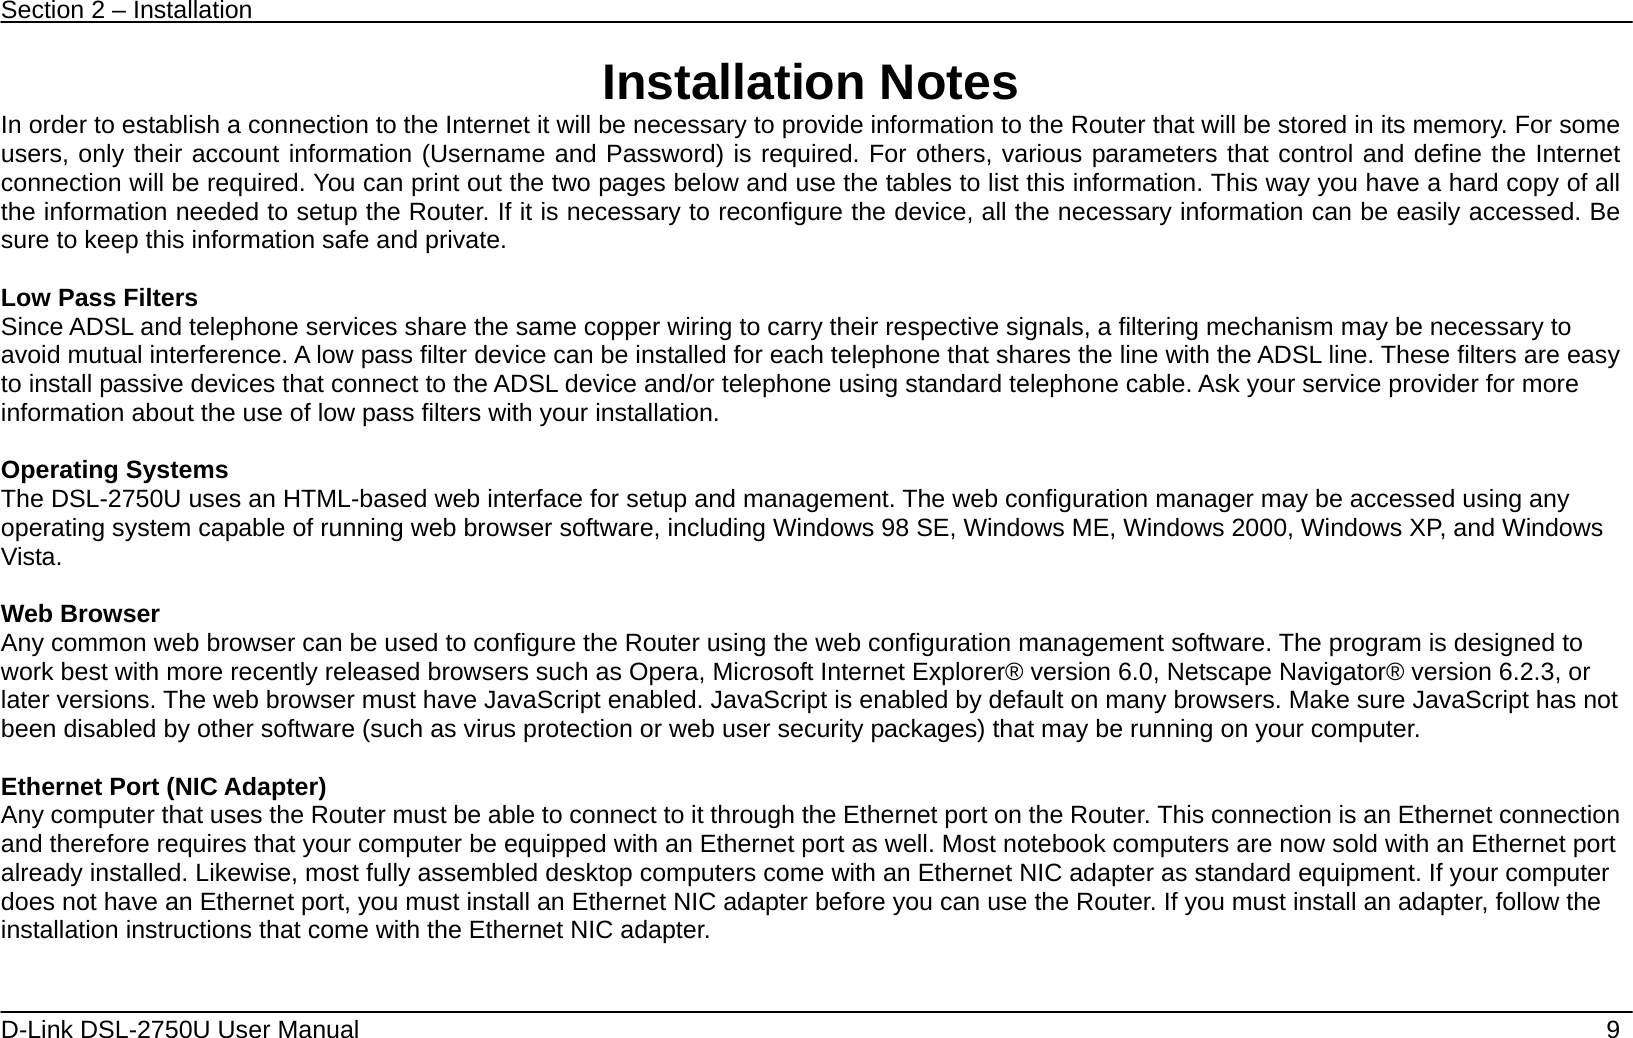 Section 2 – Installation   D-Link DSL-2750U User Manual    9 Installation Notes In order to establish a connection to the Internet it will be necessary to provide information to the Router that will be stored in its memory. For some users, only their account information (Username and Password) is required. For others, various parameters that control and define the Internet connection will be required. You can print out the two pages below and use the tables to list this information. This way you have a hard copy of all the information needed to setup the Router. If it is necessary to reconfigure the device, all the necessary information can be easily accessed. Be sure to keep this information safe and private.  Low Pass Filters Since ADSL and telephone services share the same copper wiring to carry their respective signals, a filtering mechanism may be necessary to avoid mutual interference. A low pass filter device can be installed for each telephone that shares the line with the ADSL line. These filters are easy to install passive devices that connect to the ADSL device and/or telephone using standard telephone cable. Ask your service provider for more information about the use of low pass filters with your installation.    Operating Systems The DSL-2750U uses an HTML-based web interface for setup and management. The web configuration manager may be accessed using any operating system capable of running web browser software, including Windows 98 SE, Windows ME, Windows 2000, Windows XP, and Windows Vista.   Web Browser Any common web browser can be used to configure the Router using the web configuration management software. The program is designed to work best with more recently released browsers such as Opera, Microsoft Internet Explorer® version 6.0, Netscape Navigator® version 6.2.3, or later versions. The web browser must have JavaScript enabled. JavaScript is enabled by default on many browsers. Make sure JavaScript has not been disabled by other software (such as virus protection or web user security packages) that may be running on your computer.  Ethernet Port (NIC Adapter) Any computer that uses the Router must be able to connect to it through the Ethernet port on the Router. This connection is an Ethernet connection and therefore requires that your computer be equipped with an Ethernet port as well. Most notebook computers are now sold with an Ethernet port already installed. Likewise, most fully assembled desktop computers come with an Ethernet NIC adapter as standard equipment. If your computer does not have an Ethernet port, you must install an Ethernet NIC adapter before you can use the Router. If you must install an adapter, follow the installation instructions that come with the Ethernet NIC adapter.     